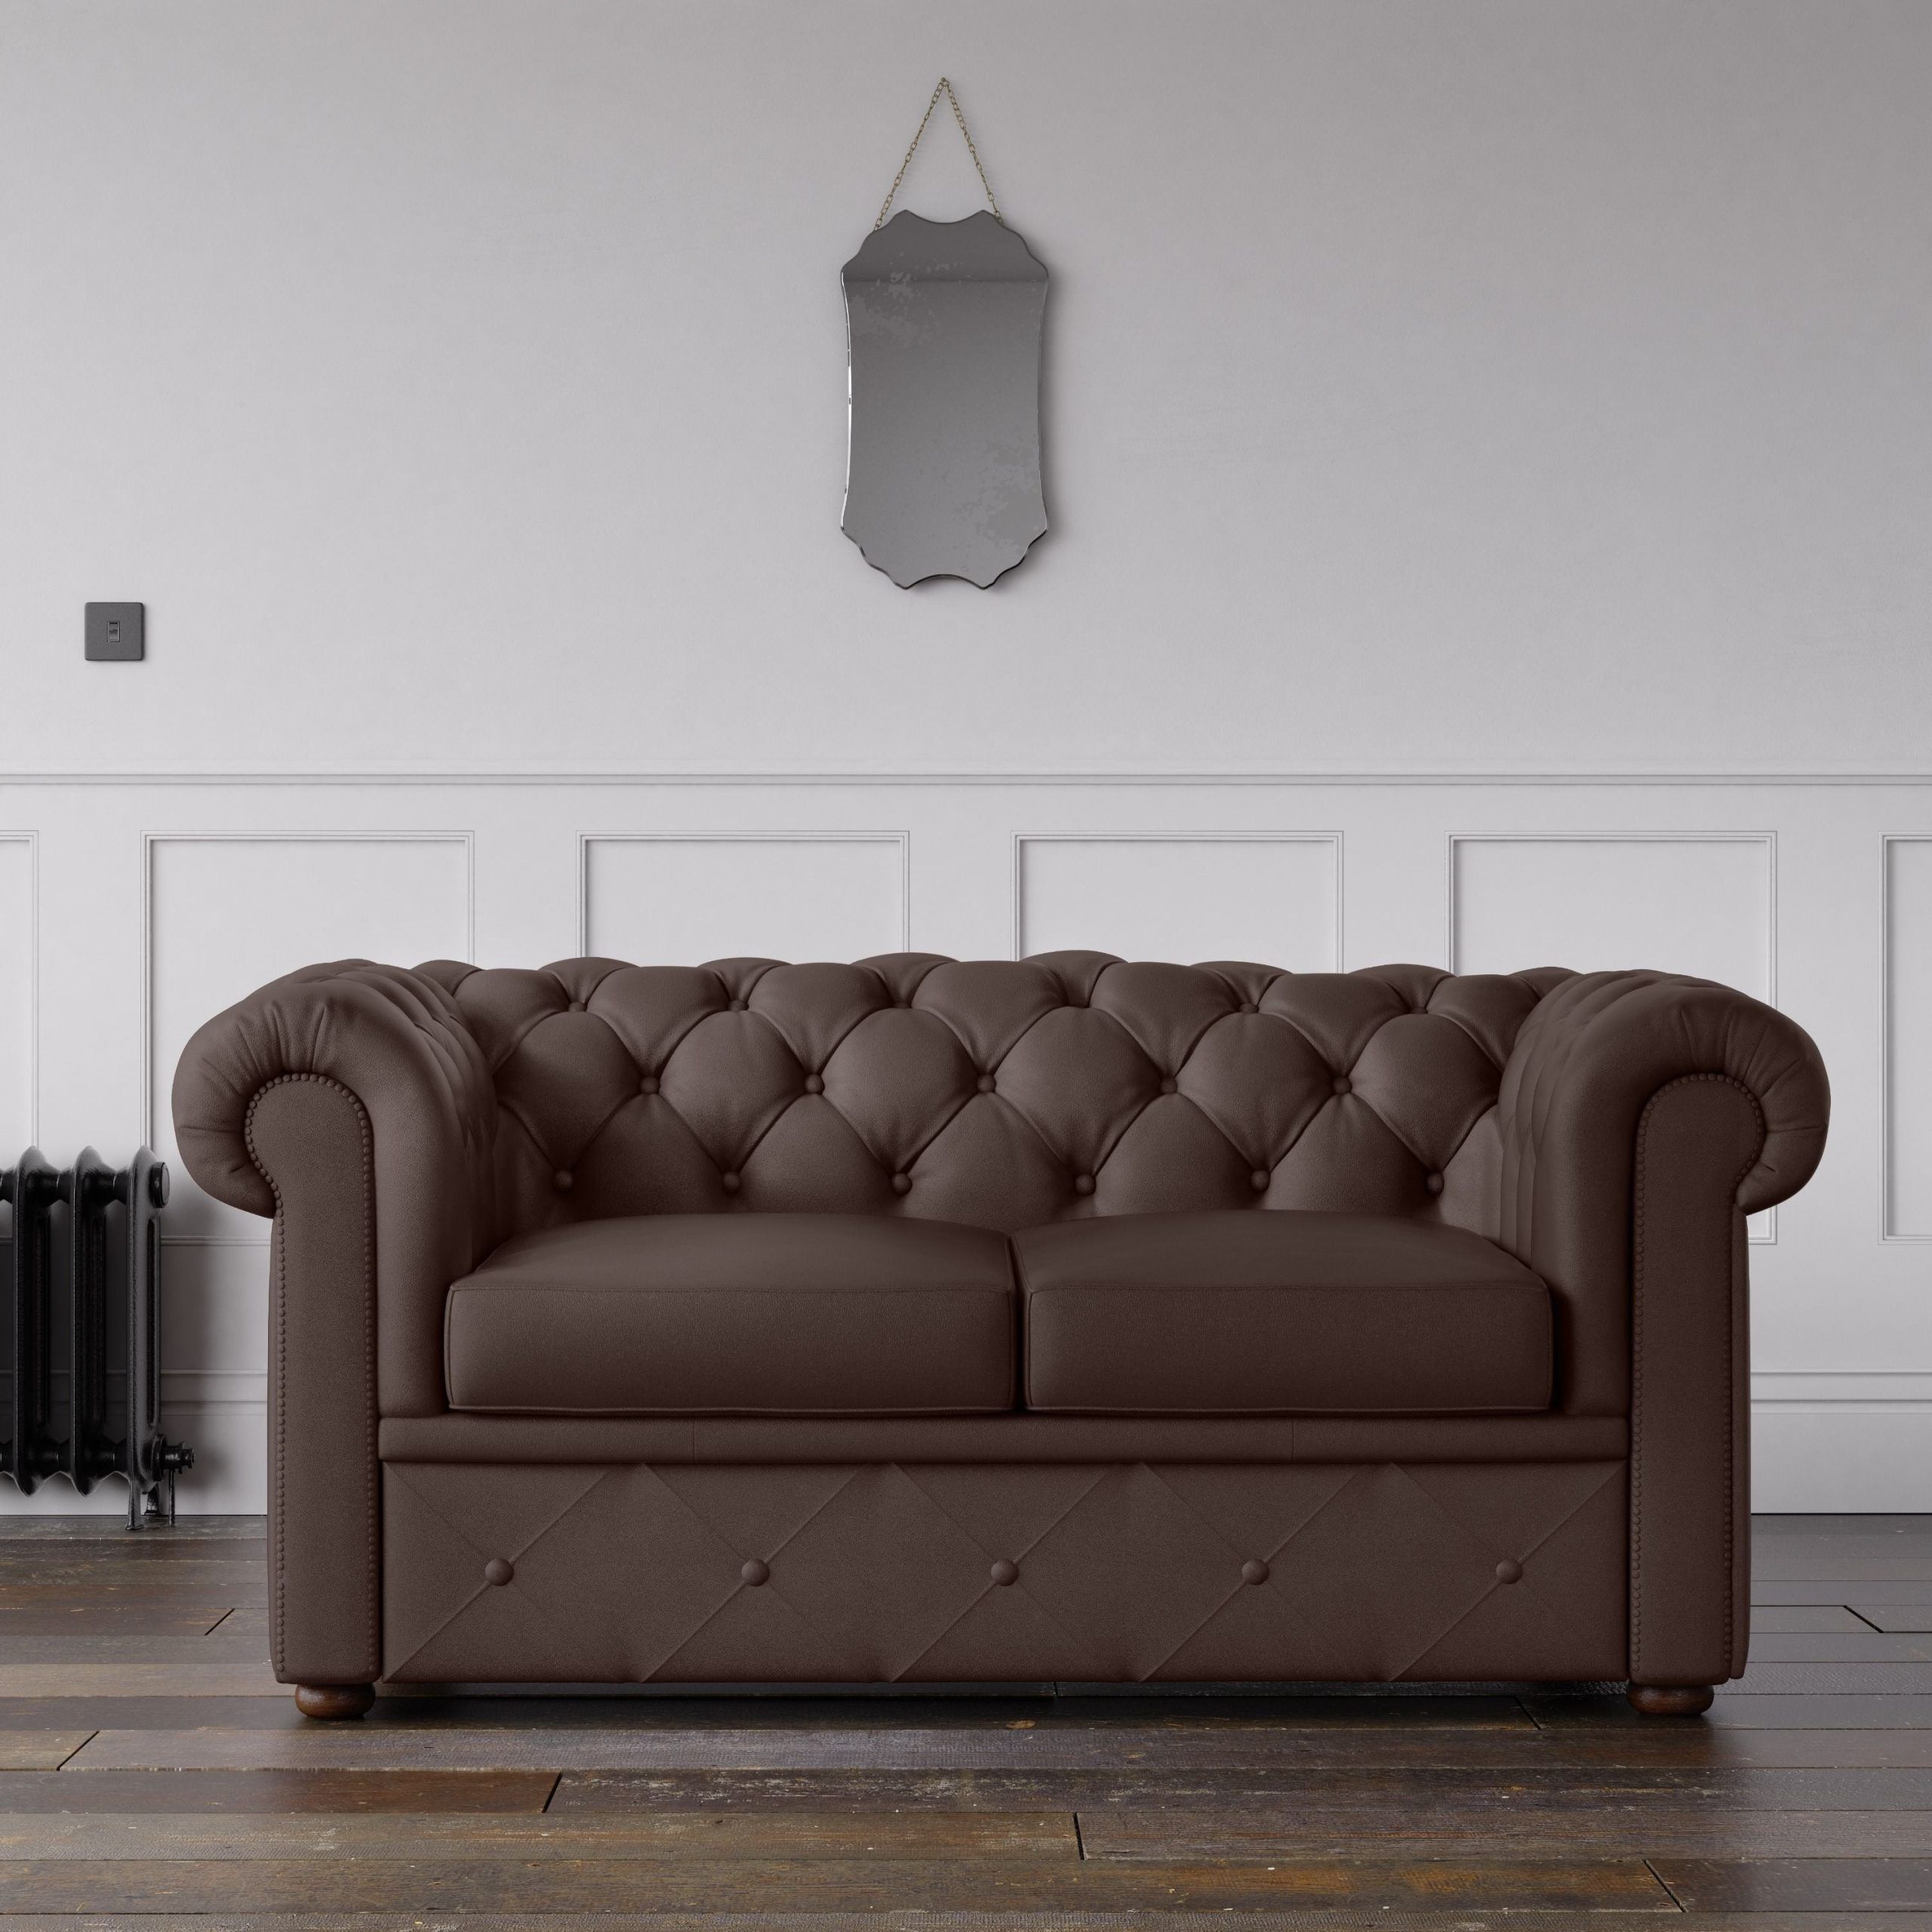 Chesterfield Faux Leather Sofa Chocolate – Endure Fabrics Within Faux Leather Sofas In Chocolate Brown (View 3 of 20)